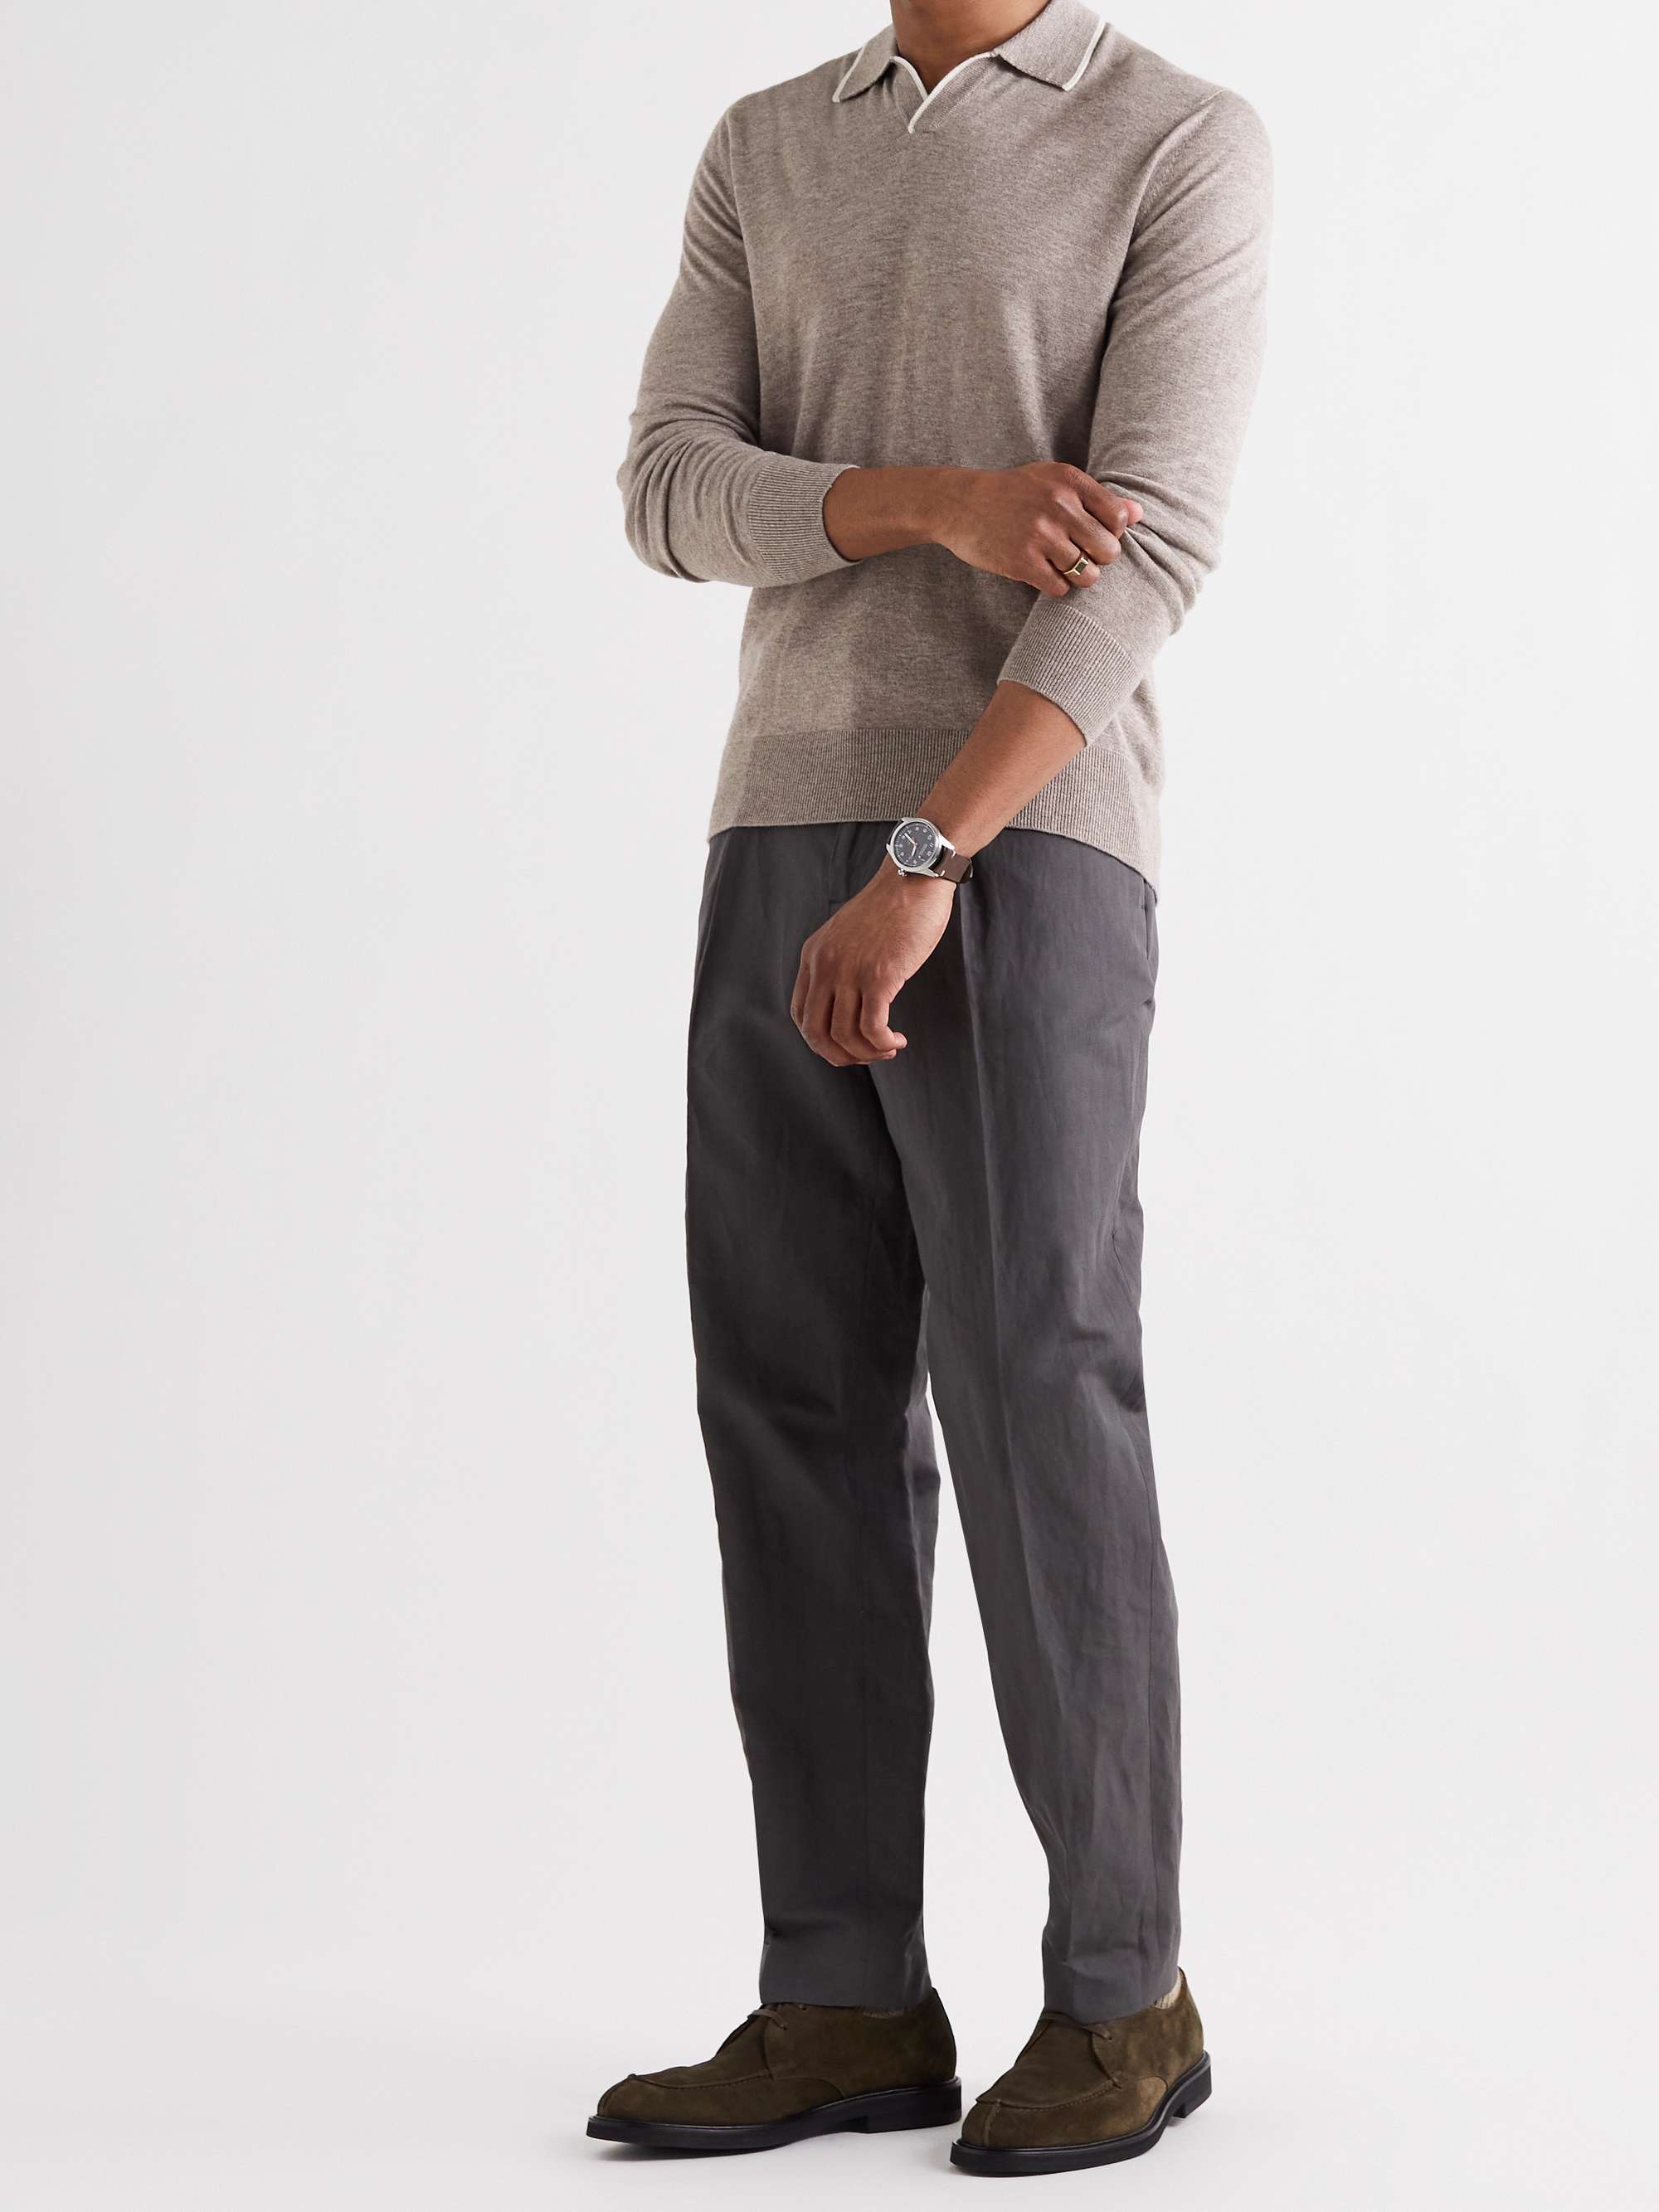 MR P. Slim-Fit Cashmere and Silk-Blend Polo Shirt